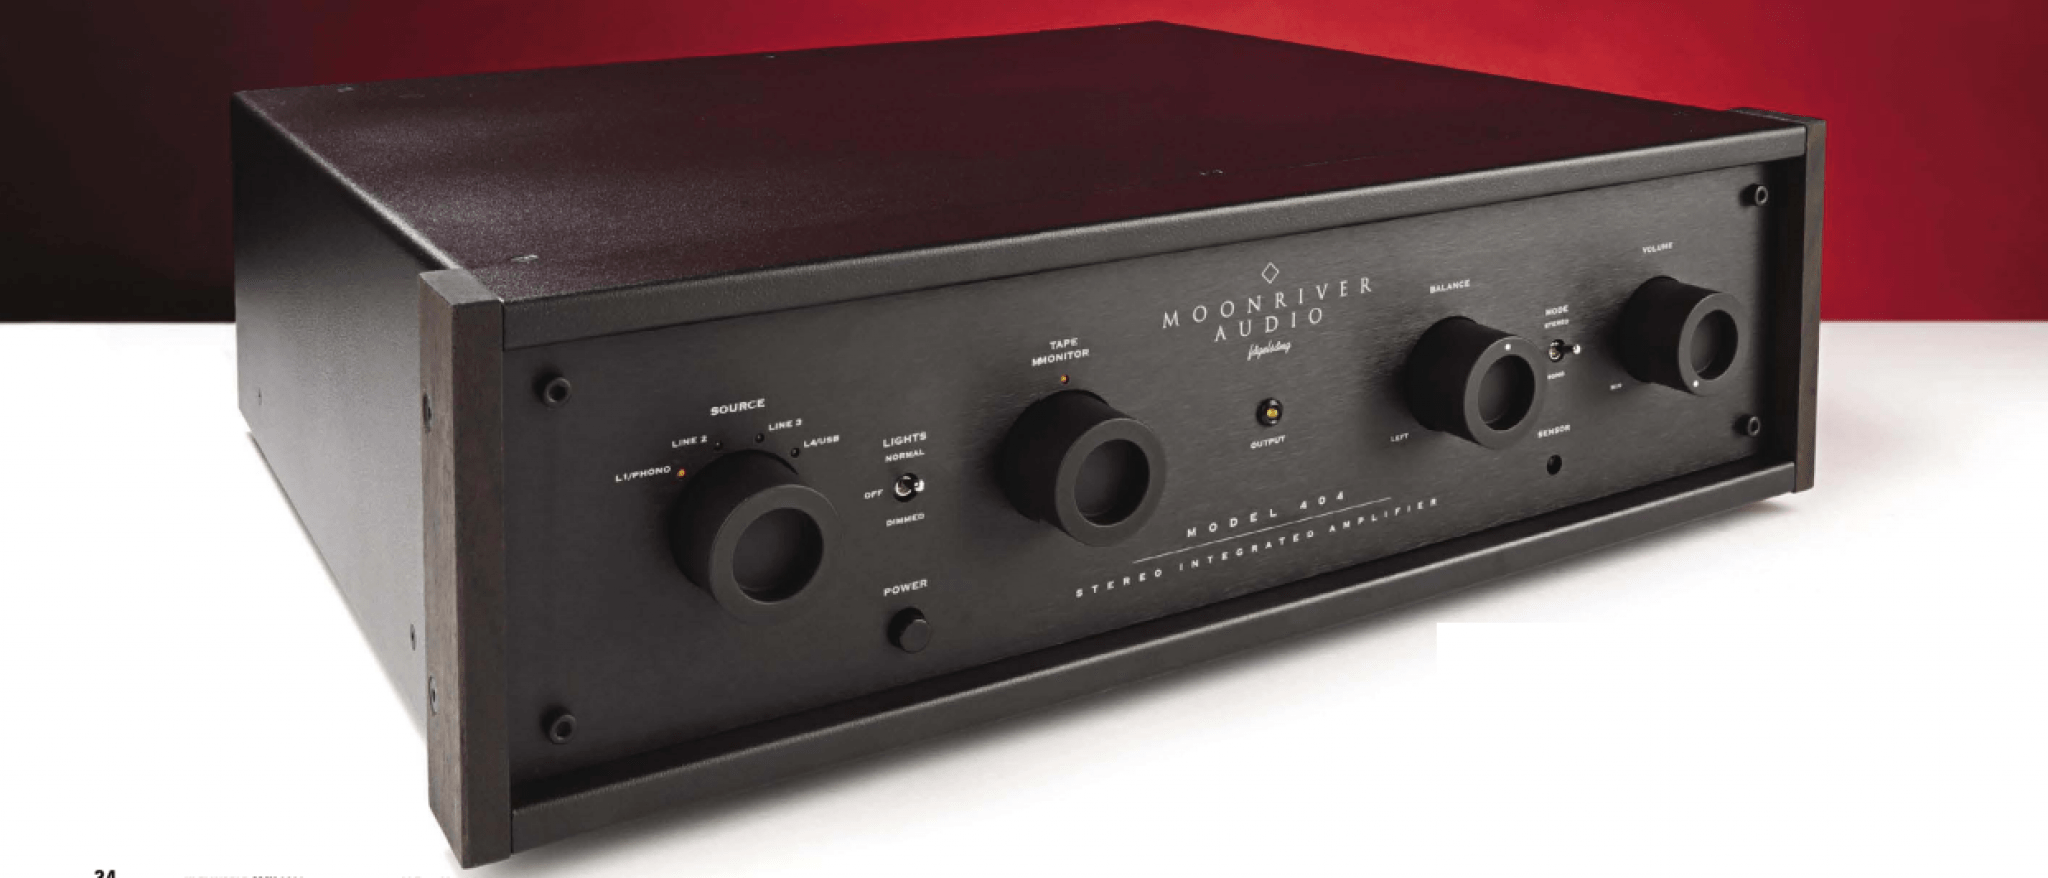 Moonriver audio model 404 review « Reviewary